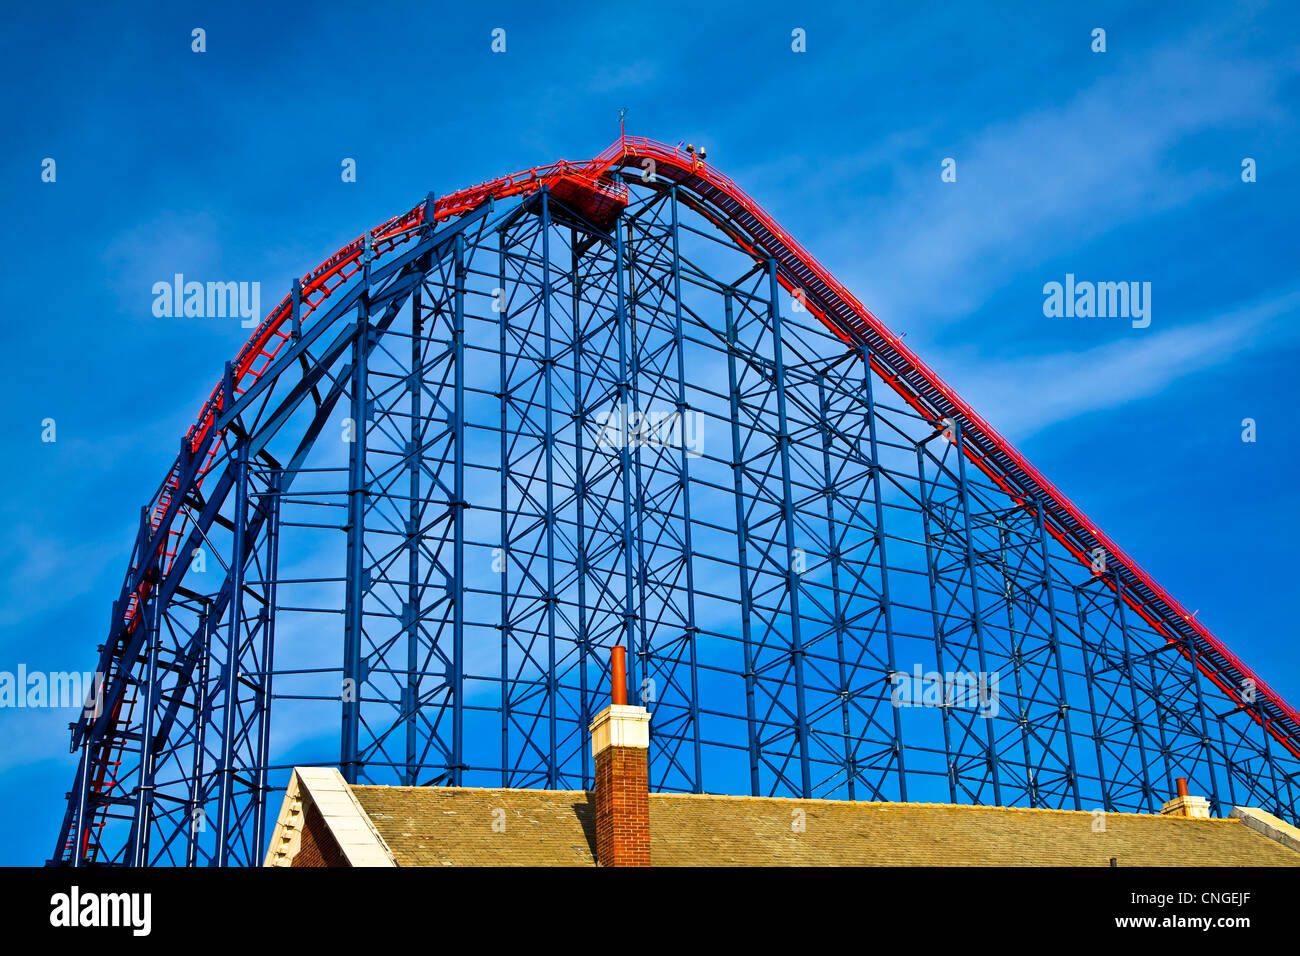 The Big One roller coaster at the Blackpool pleasure beach. Stock Photo